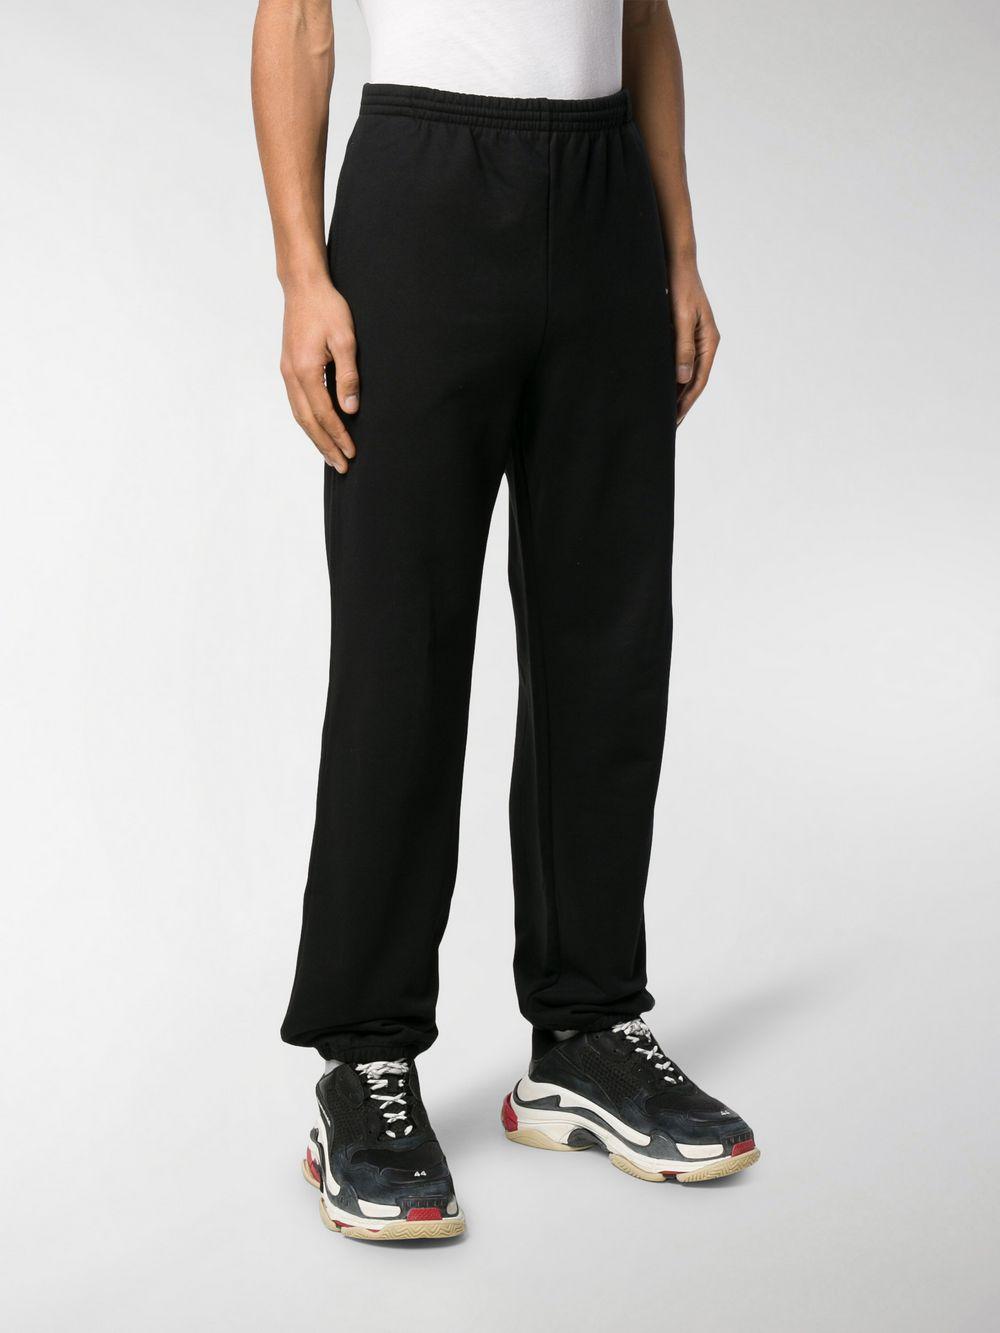 Balenciaga Cotton Loose Fit Track Pants in Black for Men - Lyst